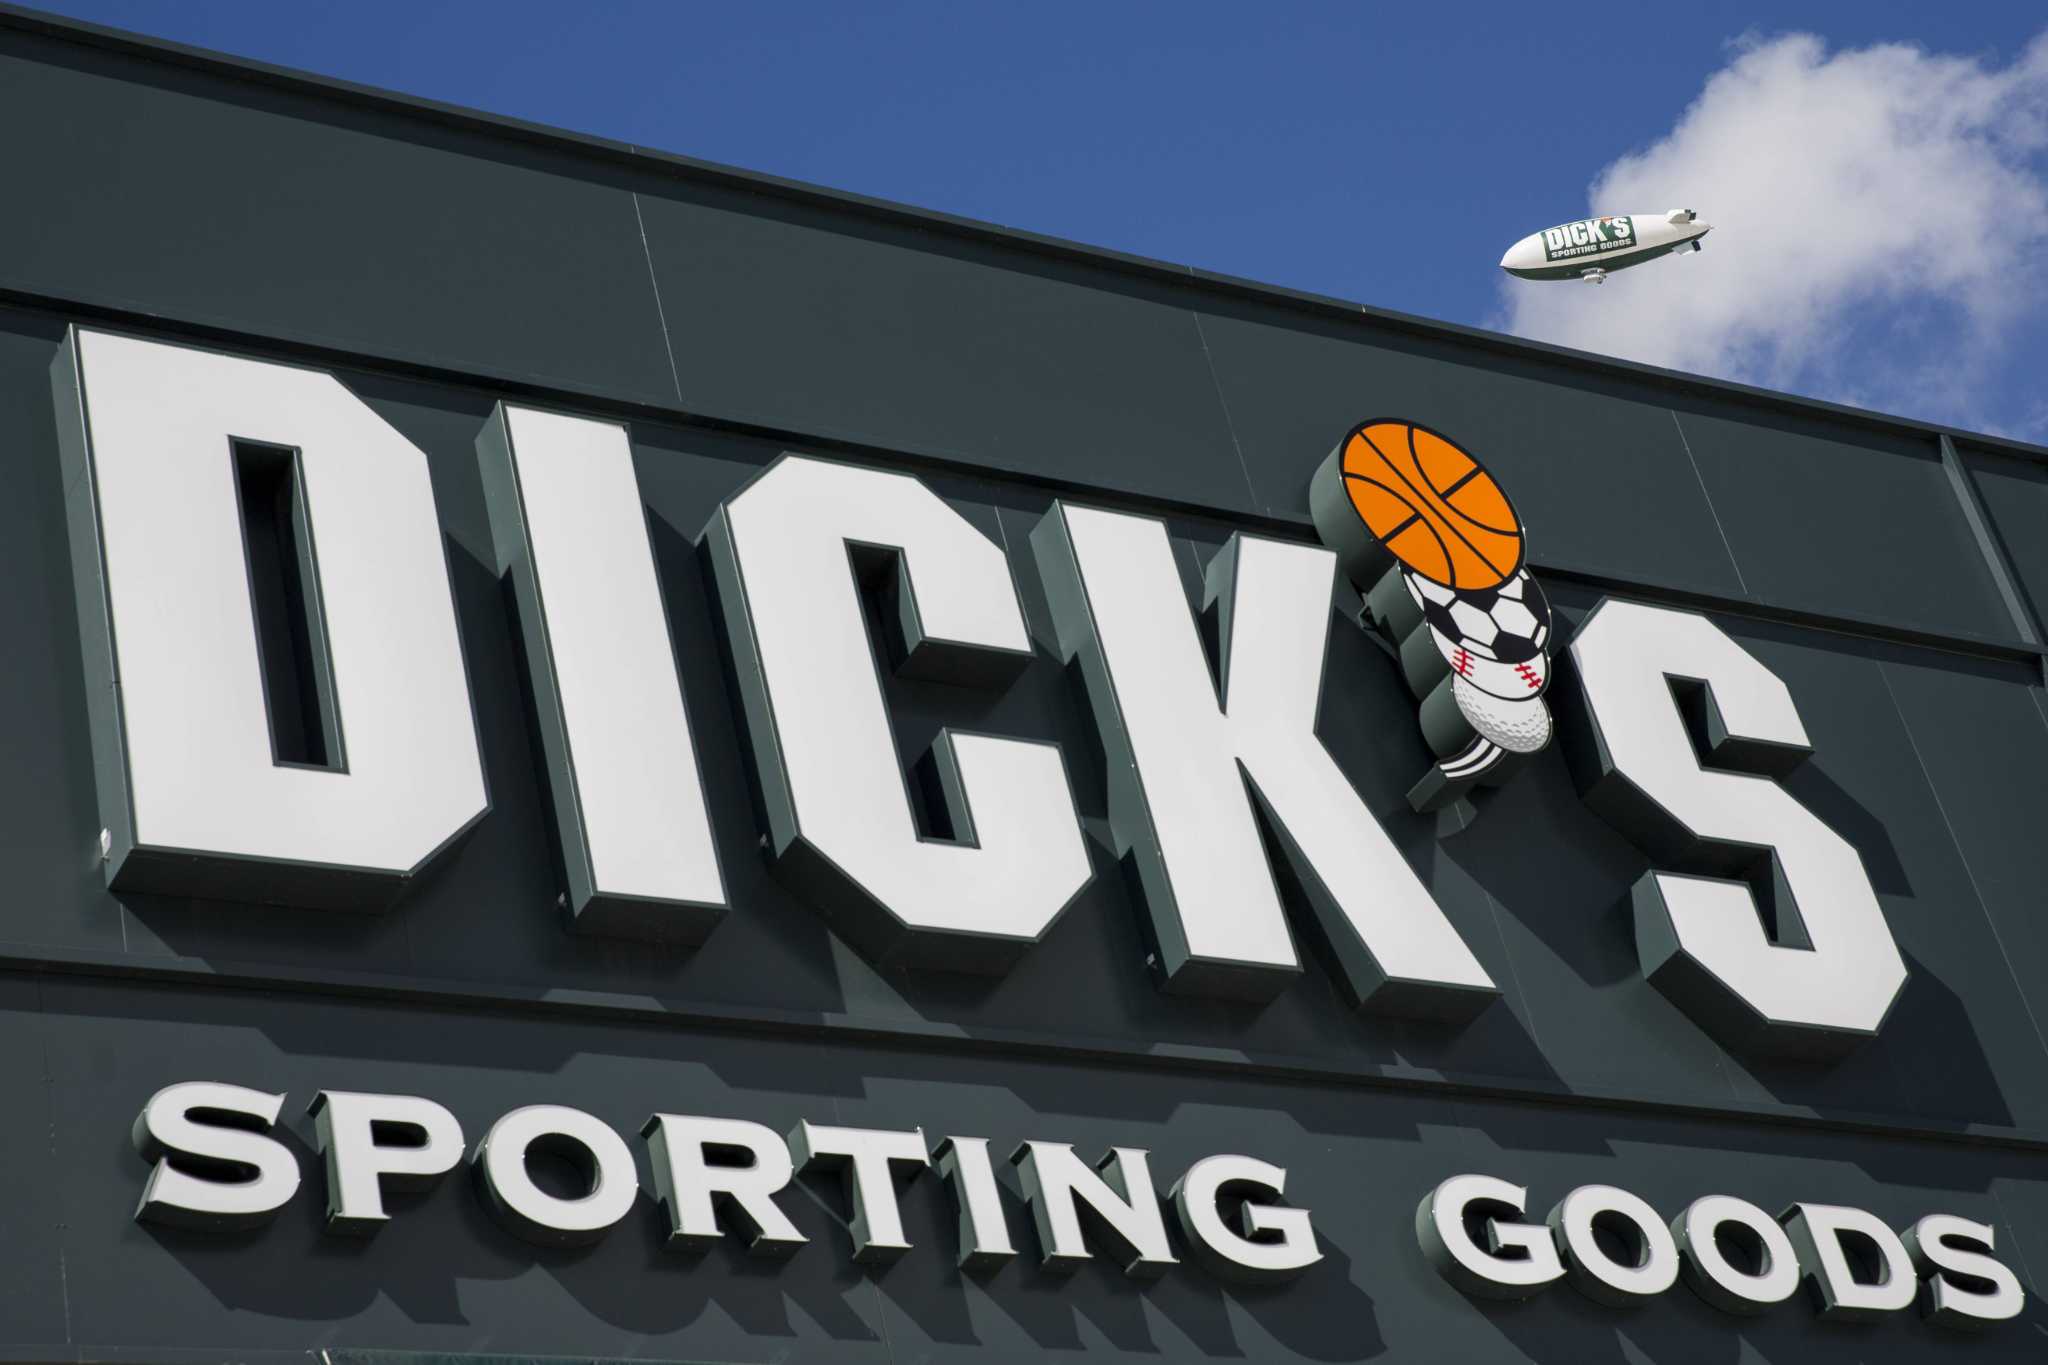 Dick's Sporting Goods grand opening is coming soon